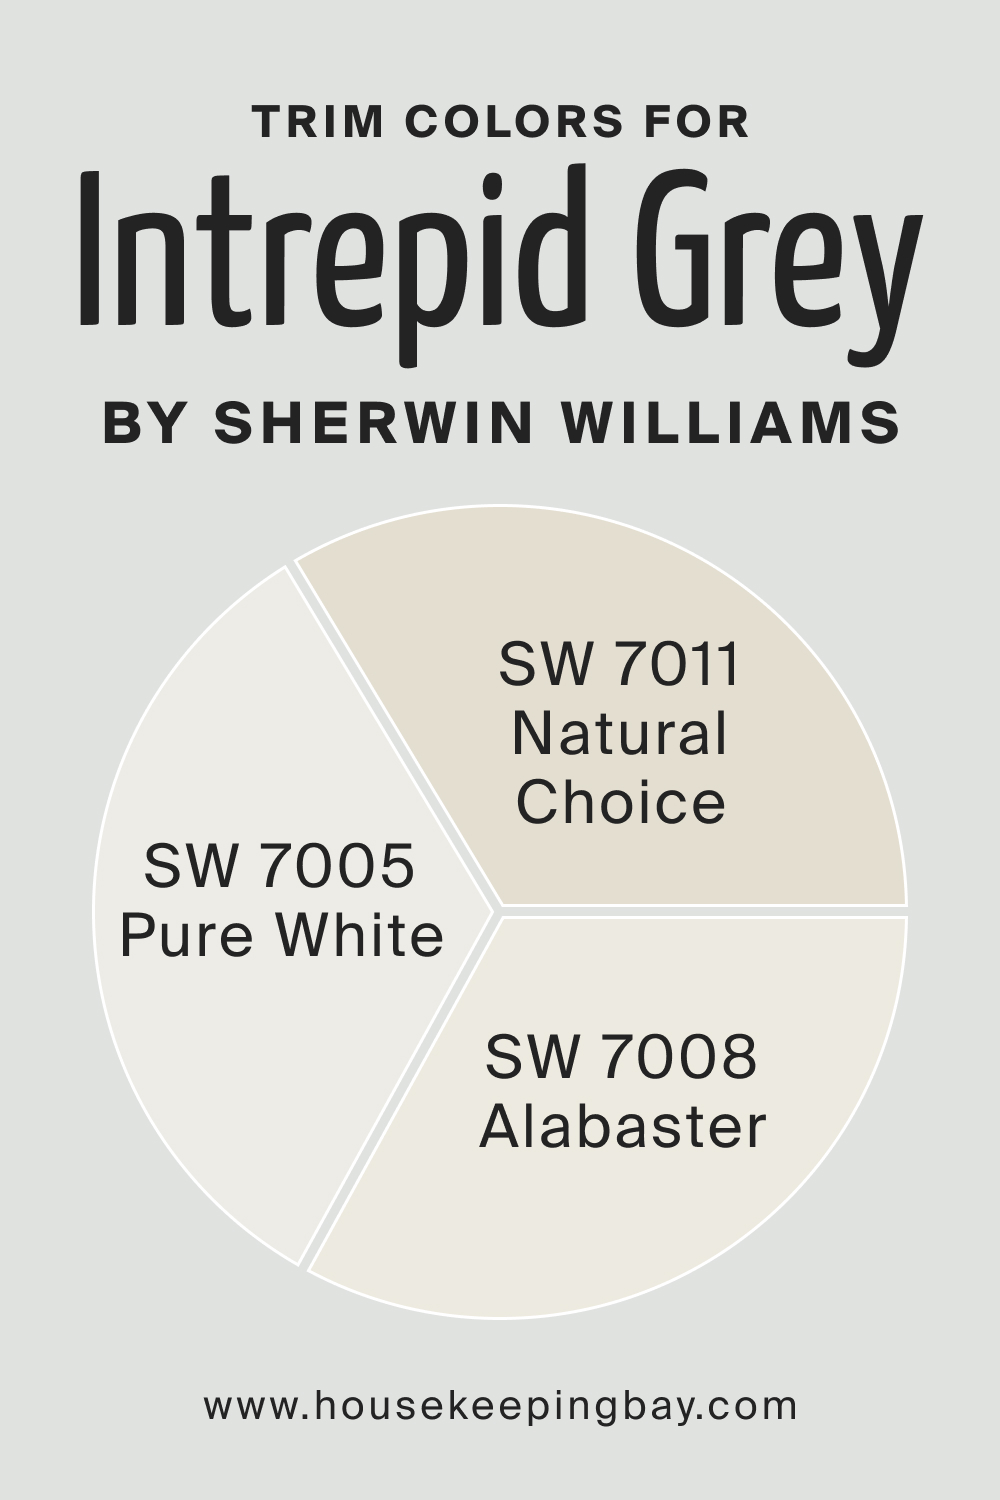 Trim Colors of SW 9556 Intrepid Grey by Sherwin Williams